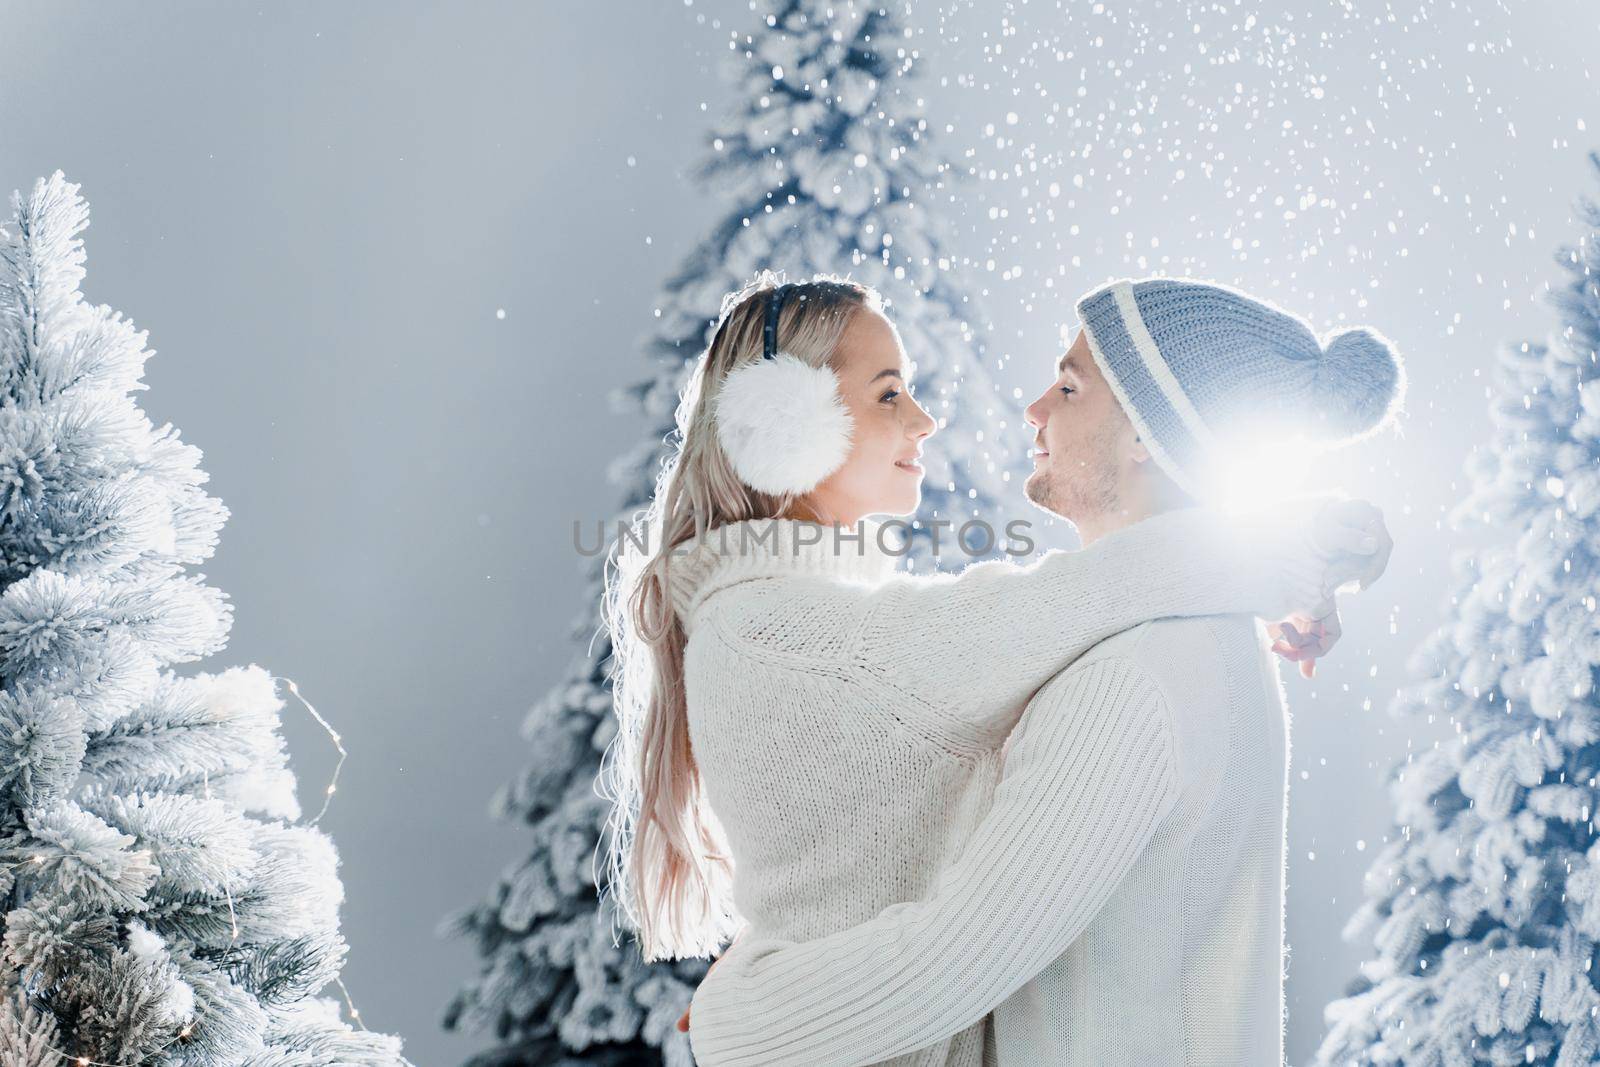 Couple kissing while snow falls near christmass trees. Winter holidays. Love story of young couple weared white pullovers. Happy man and young woman hug each other.